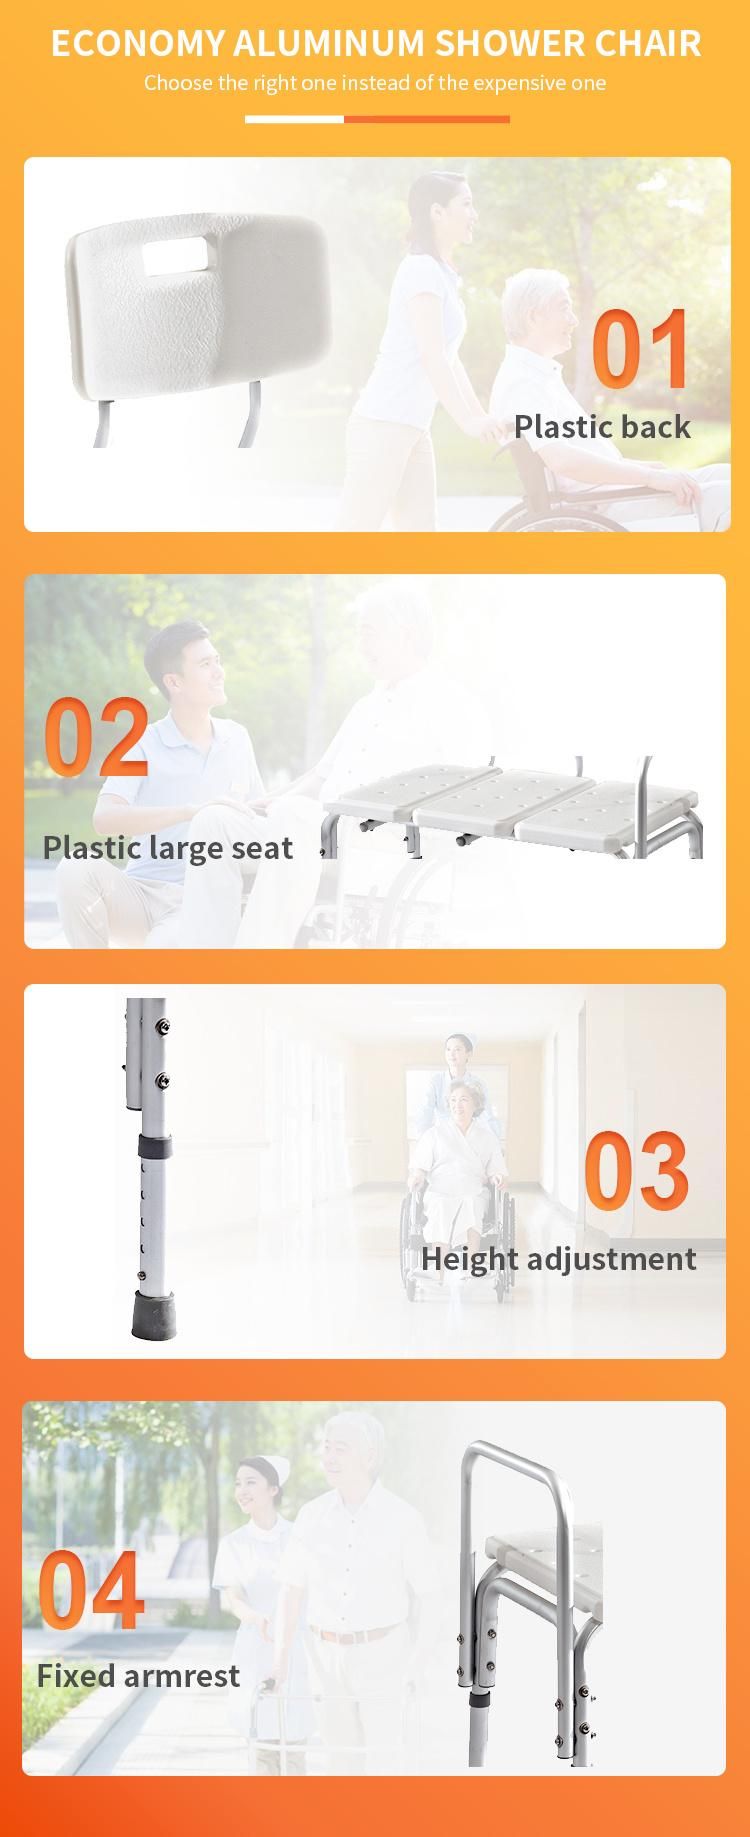 Hot Selling Europe Design Aluminum Lightweight Easy Carry portable Seat with Handle PE Seat Board Shower Chair Medical Equipment Rehabilitation Products